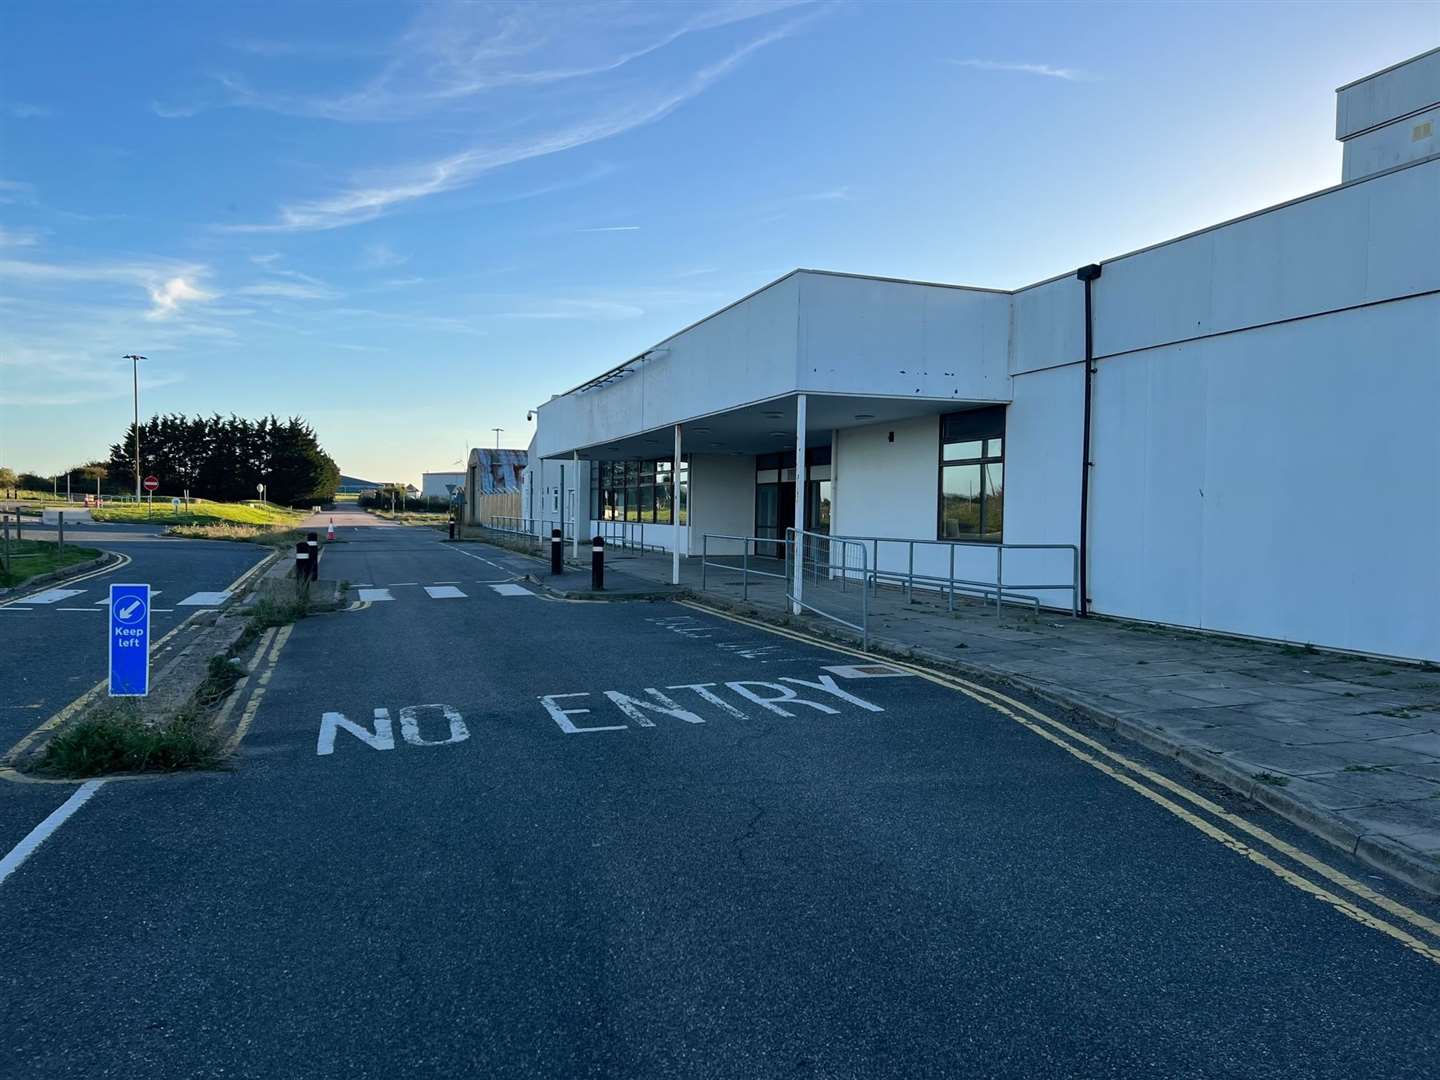 Exterior of the Manston Airport building